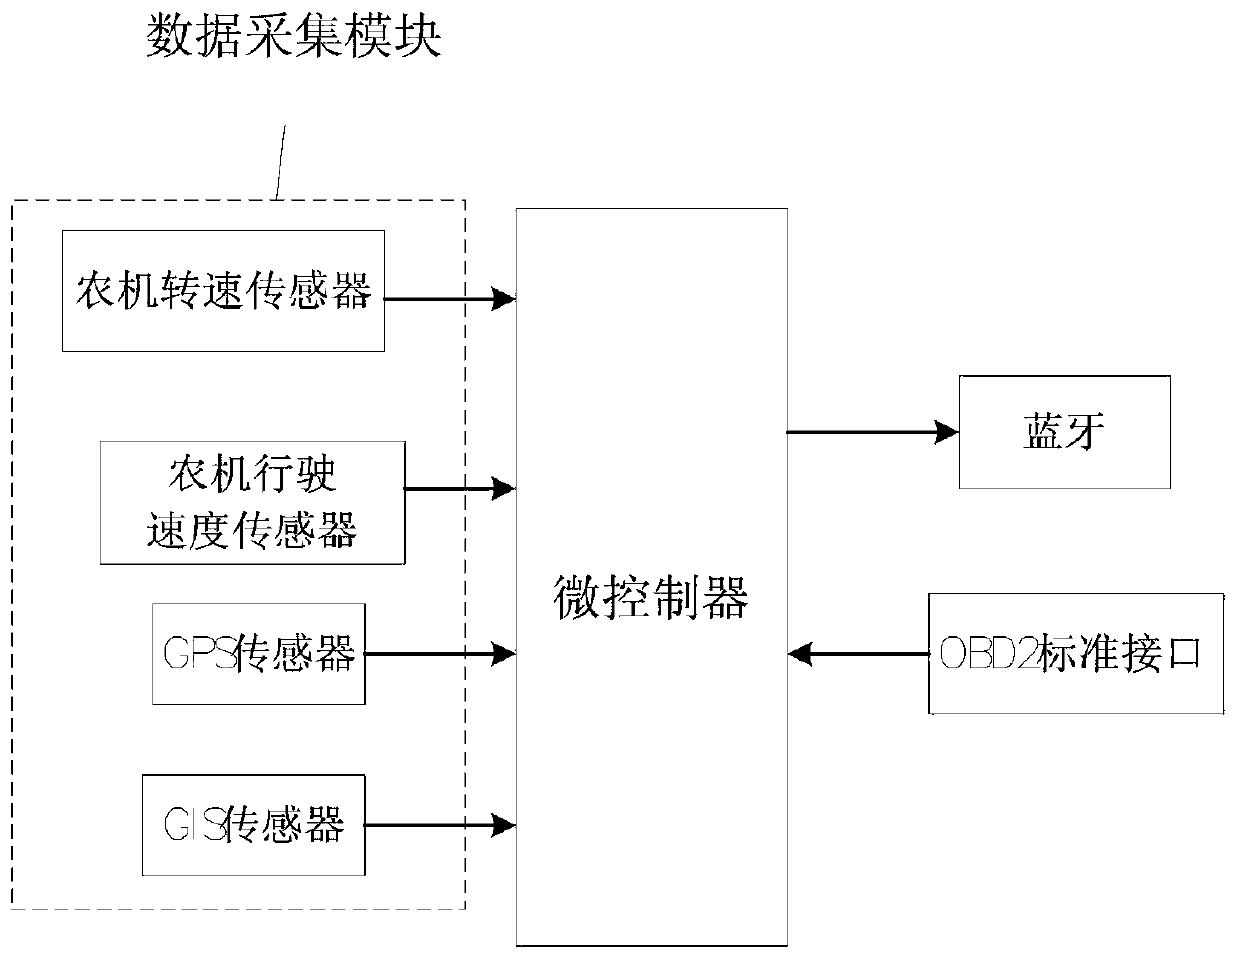 An agricultural machinery equipment monitoring and management system and method based on an Android smart phone